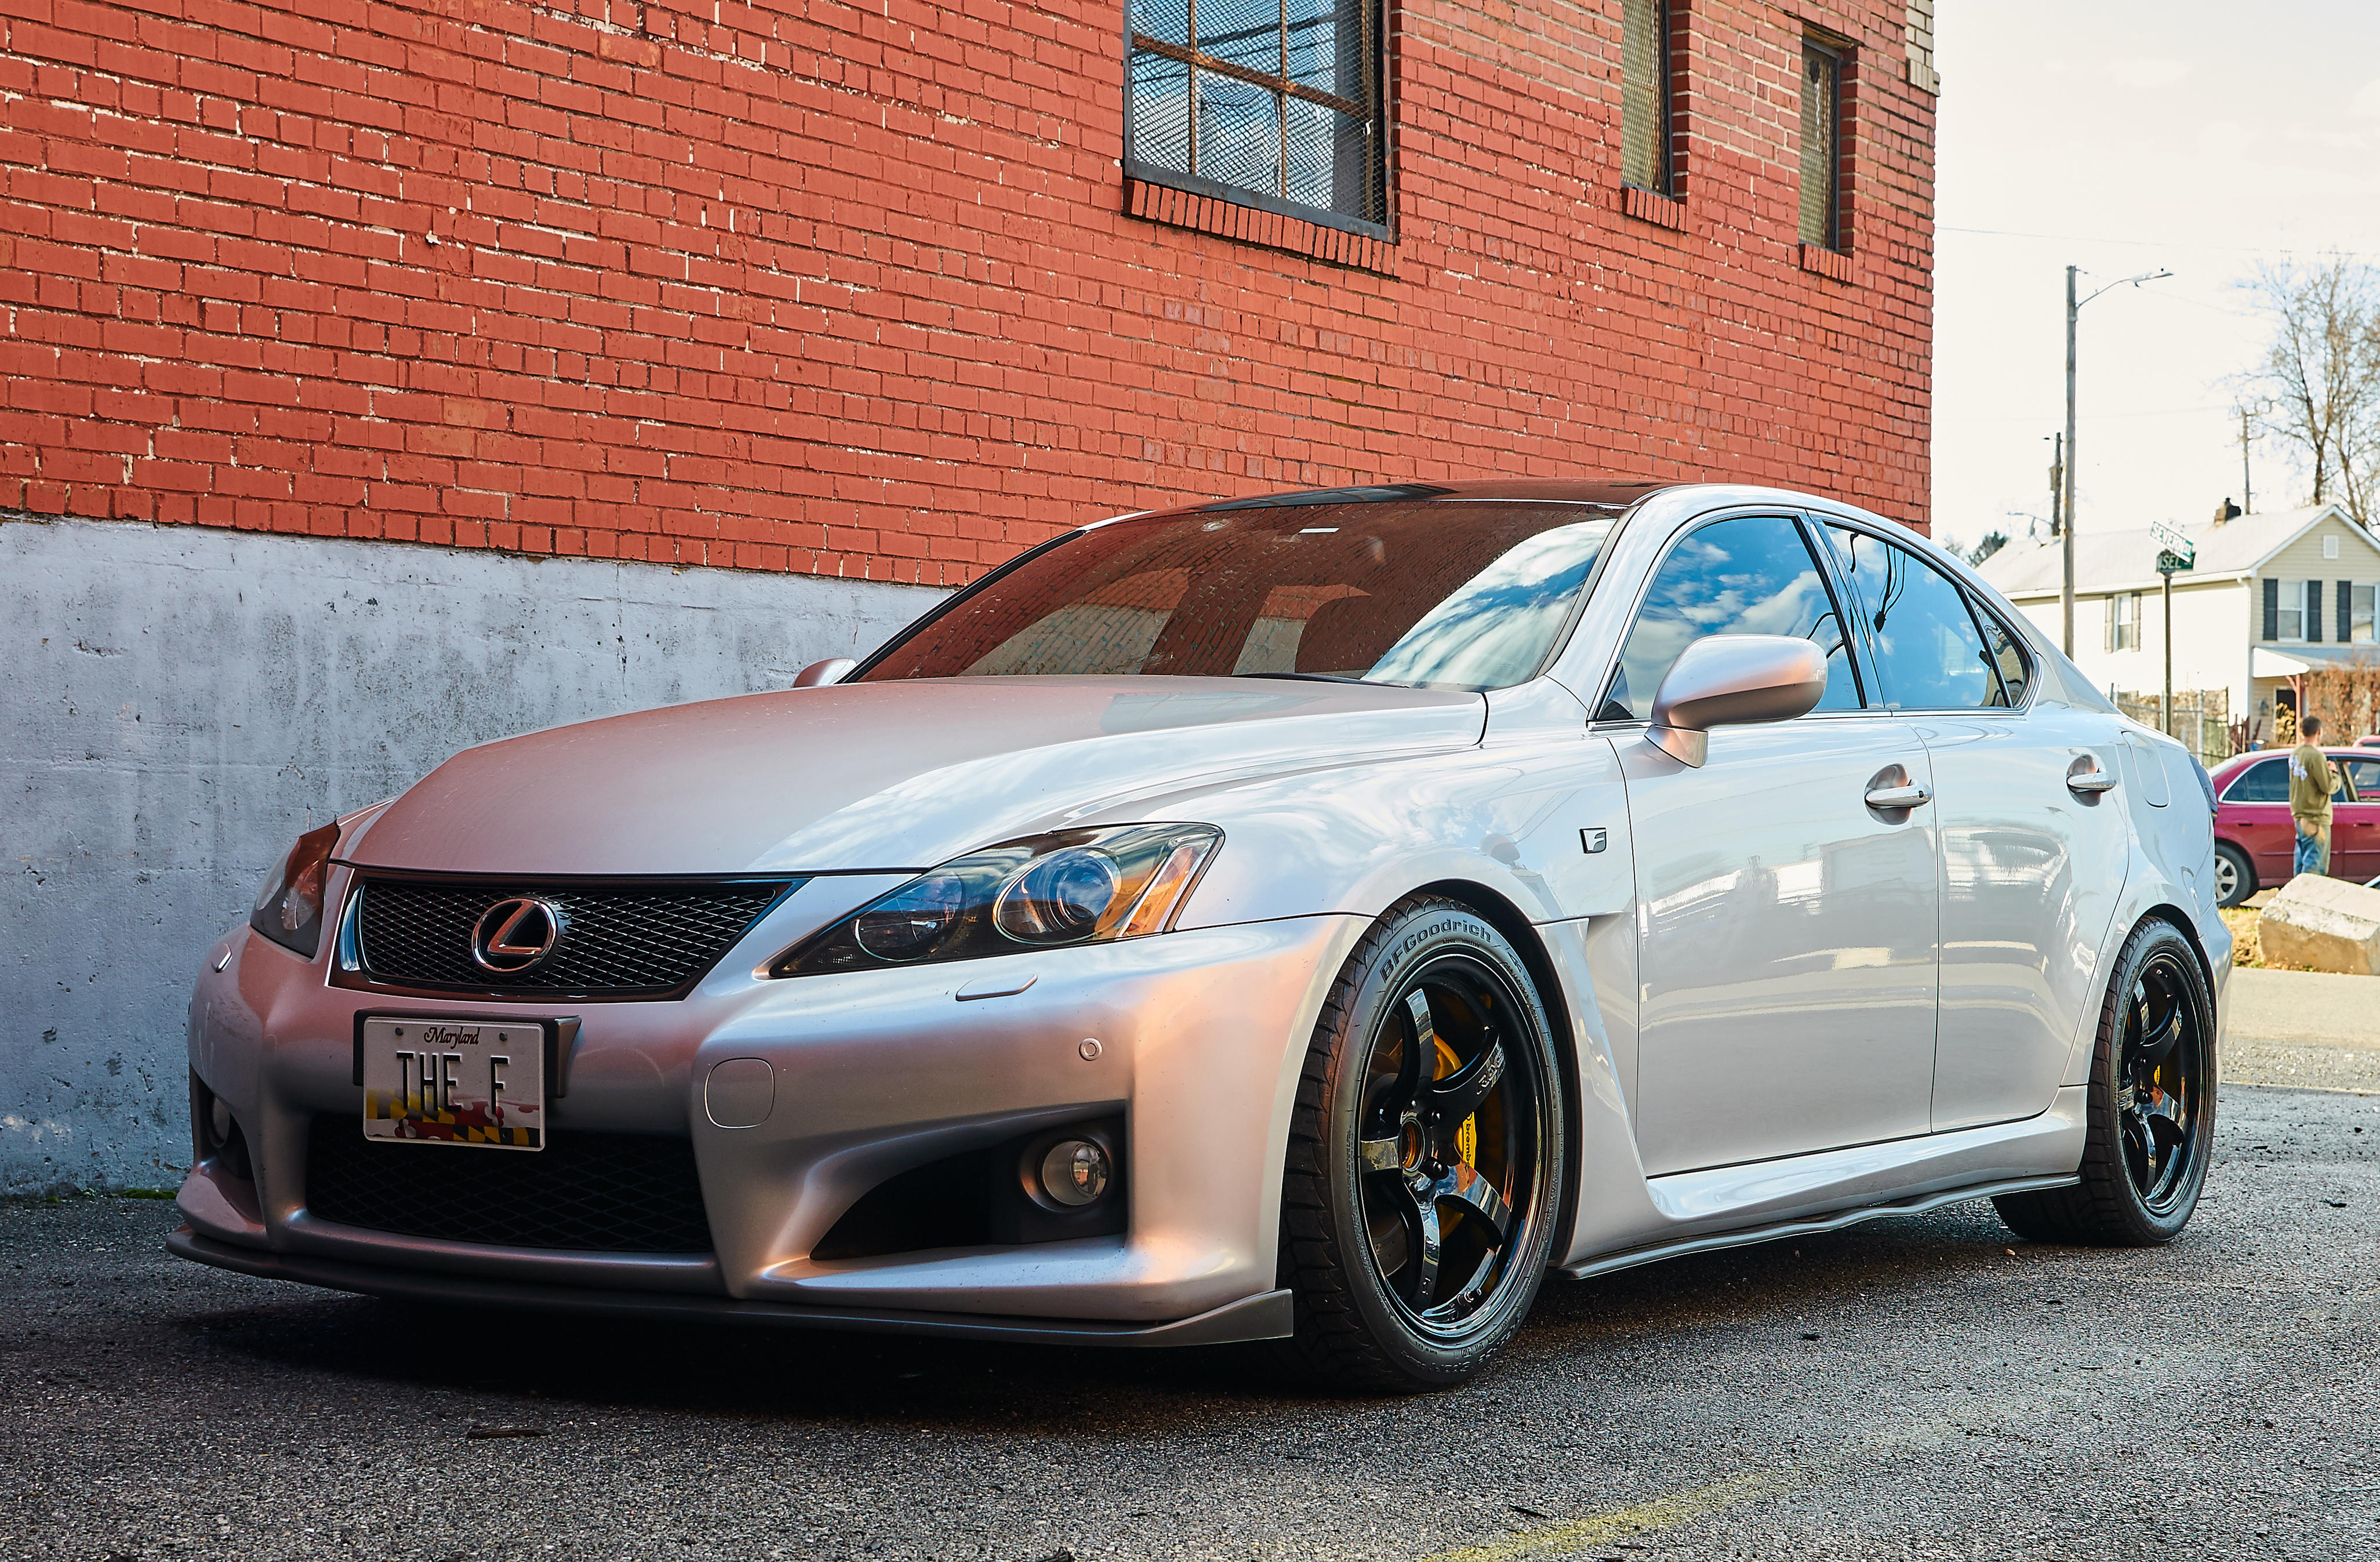 40 on the front, 35 on the rear? - ClubLexus - Lexus Forum Discussion